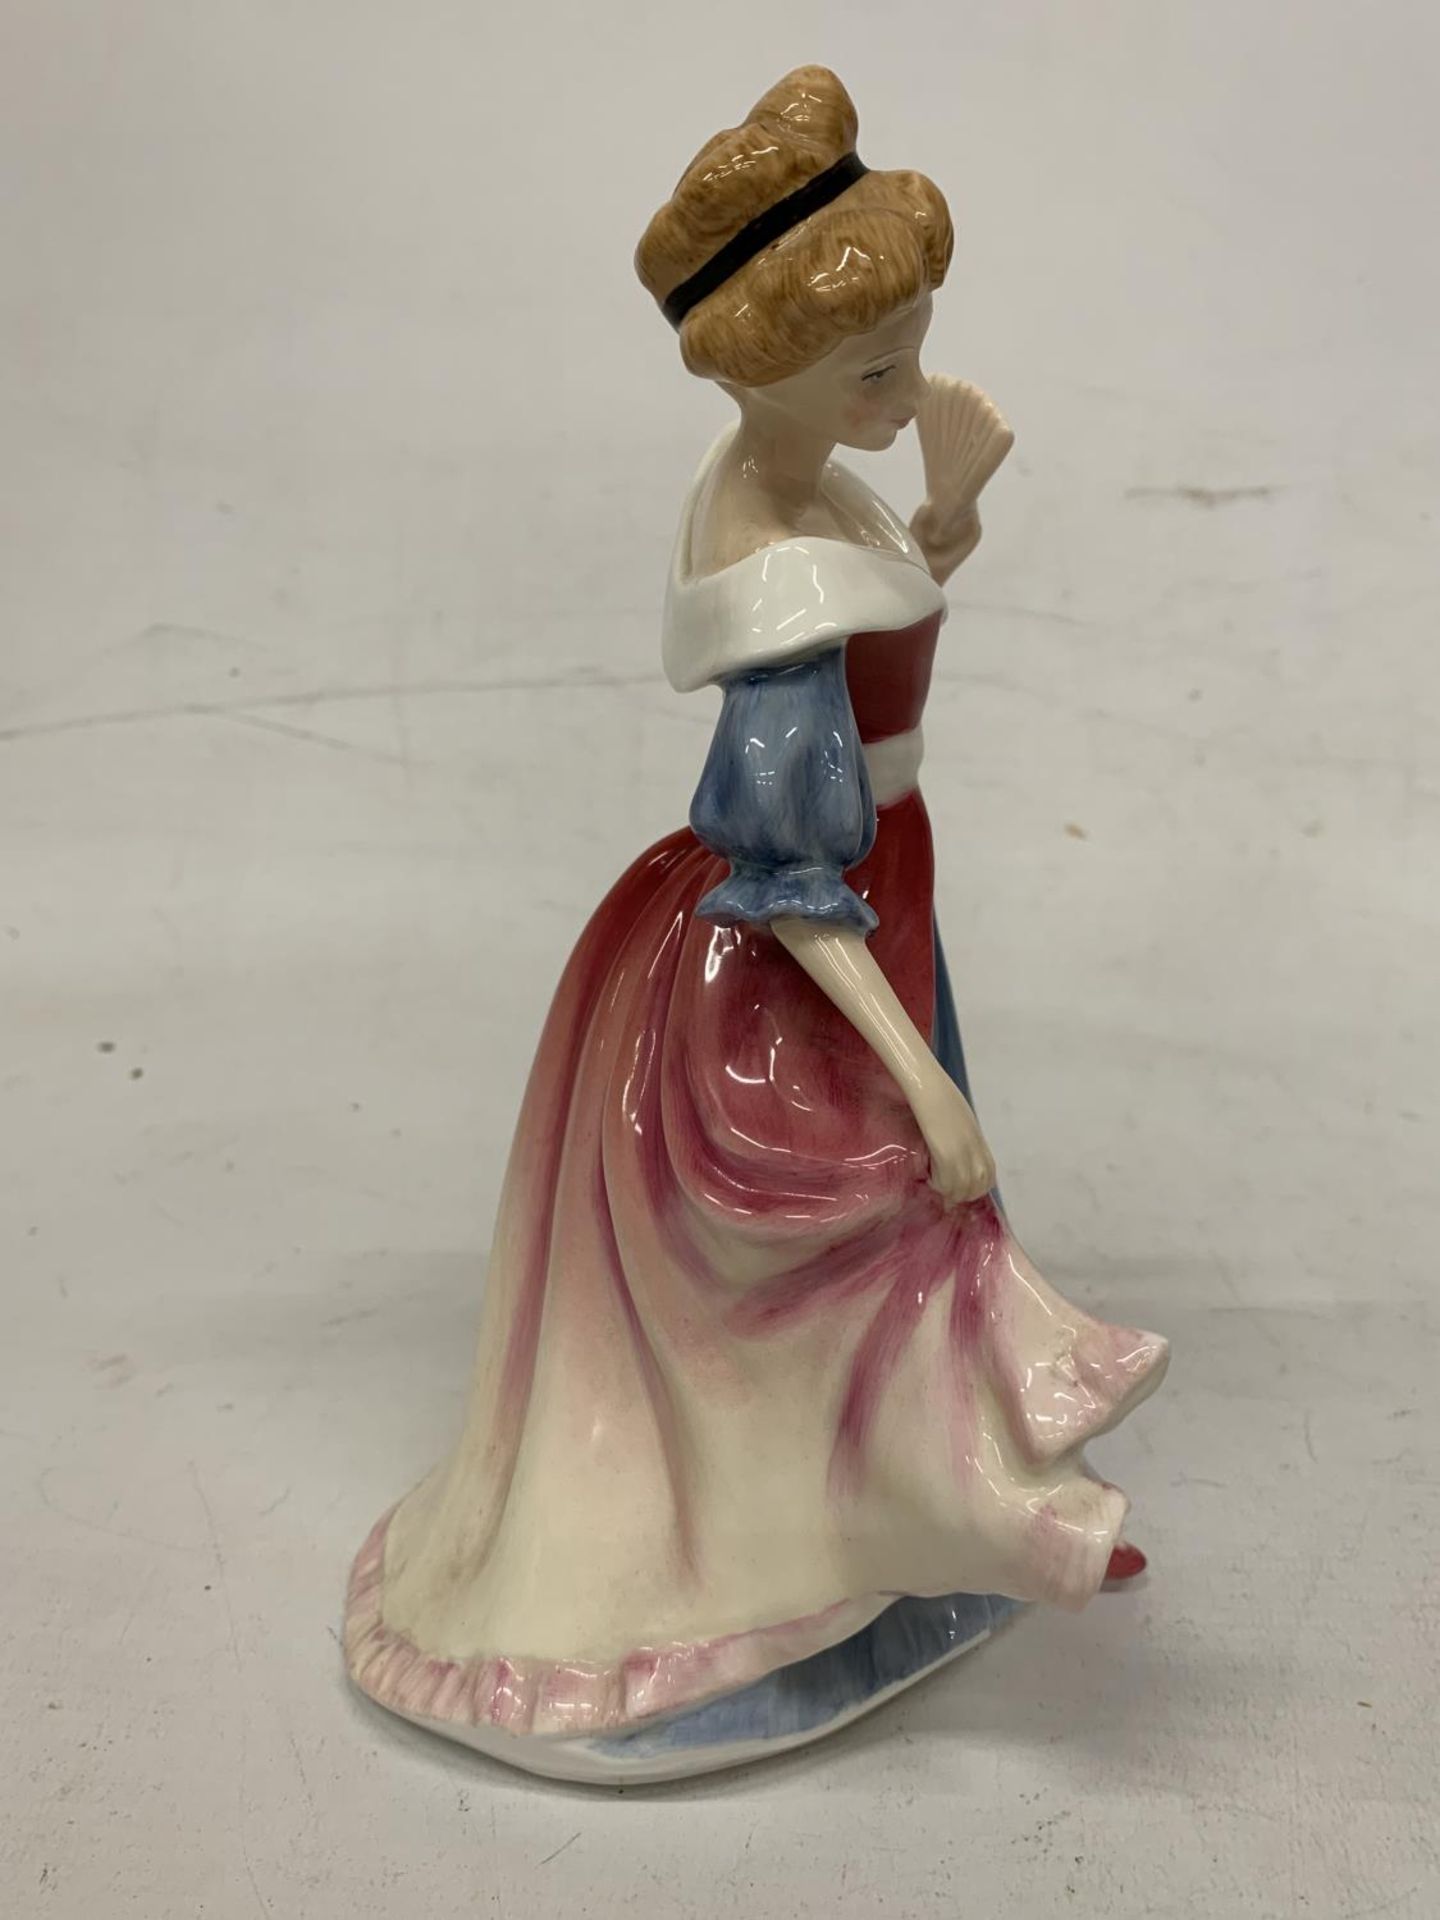 A ROYAL DOULTON FIGUREOF OF THE YEAR "AMY" HN 3316 - Image 2 of 5